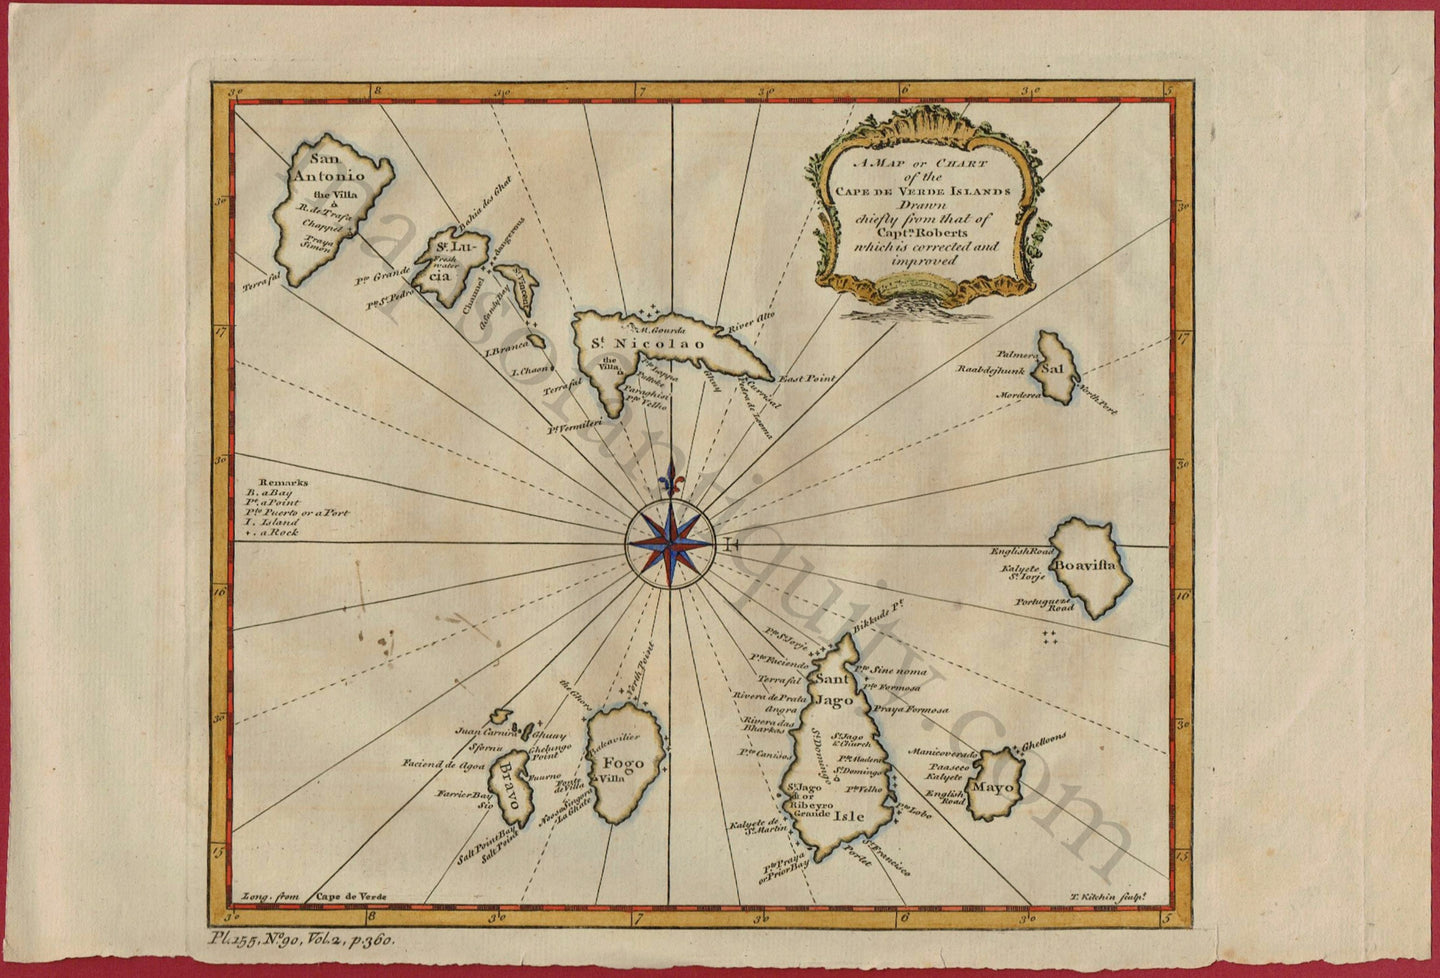 Antique-A-Map-or-Chart-of-the-Cape-de-Verde-Islands-Kitchin-Africa-1750s-1700s-Mid-18th-Century-Maps-of-Antiquity